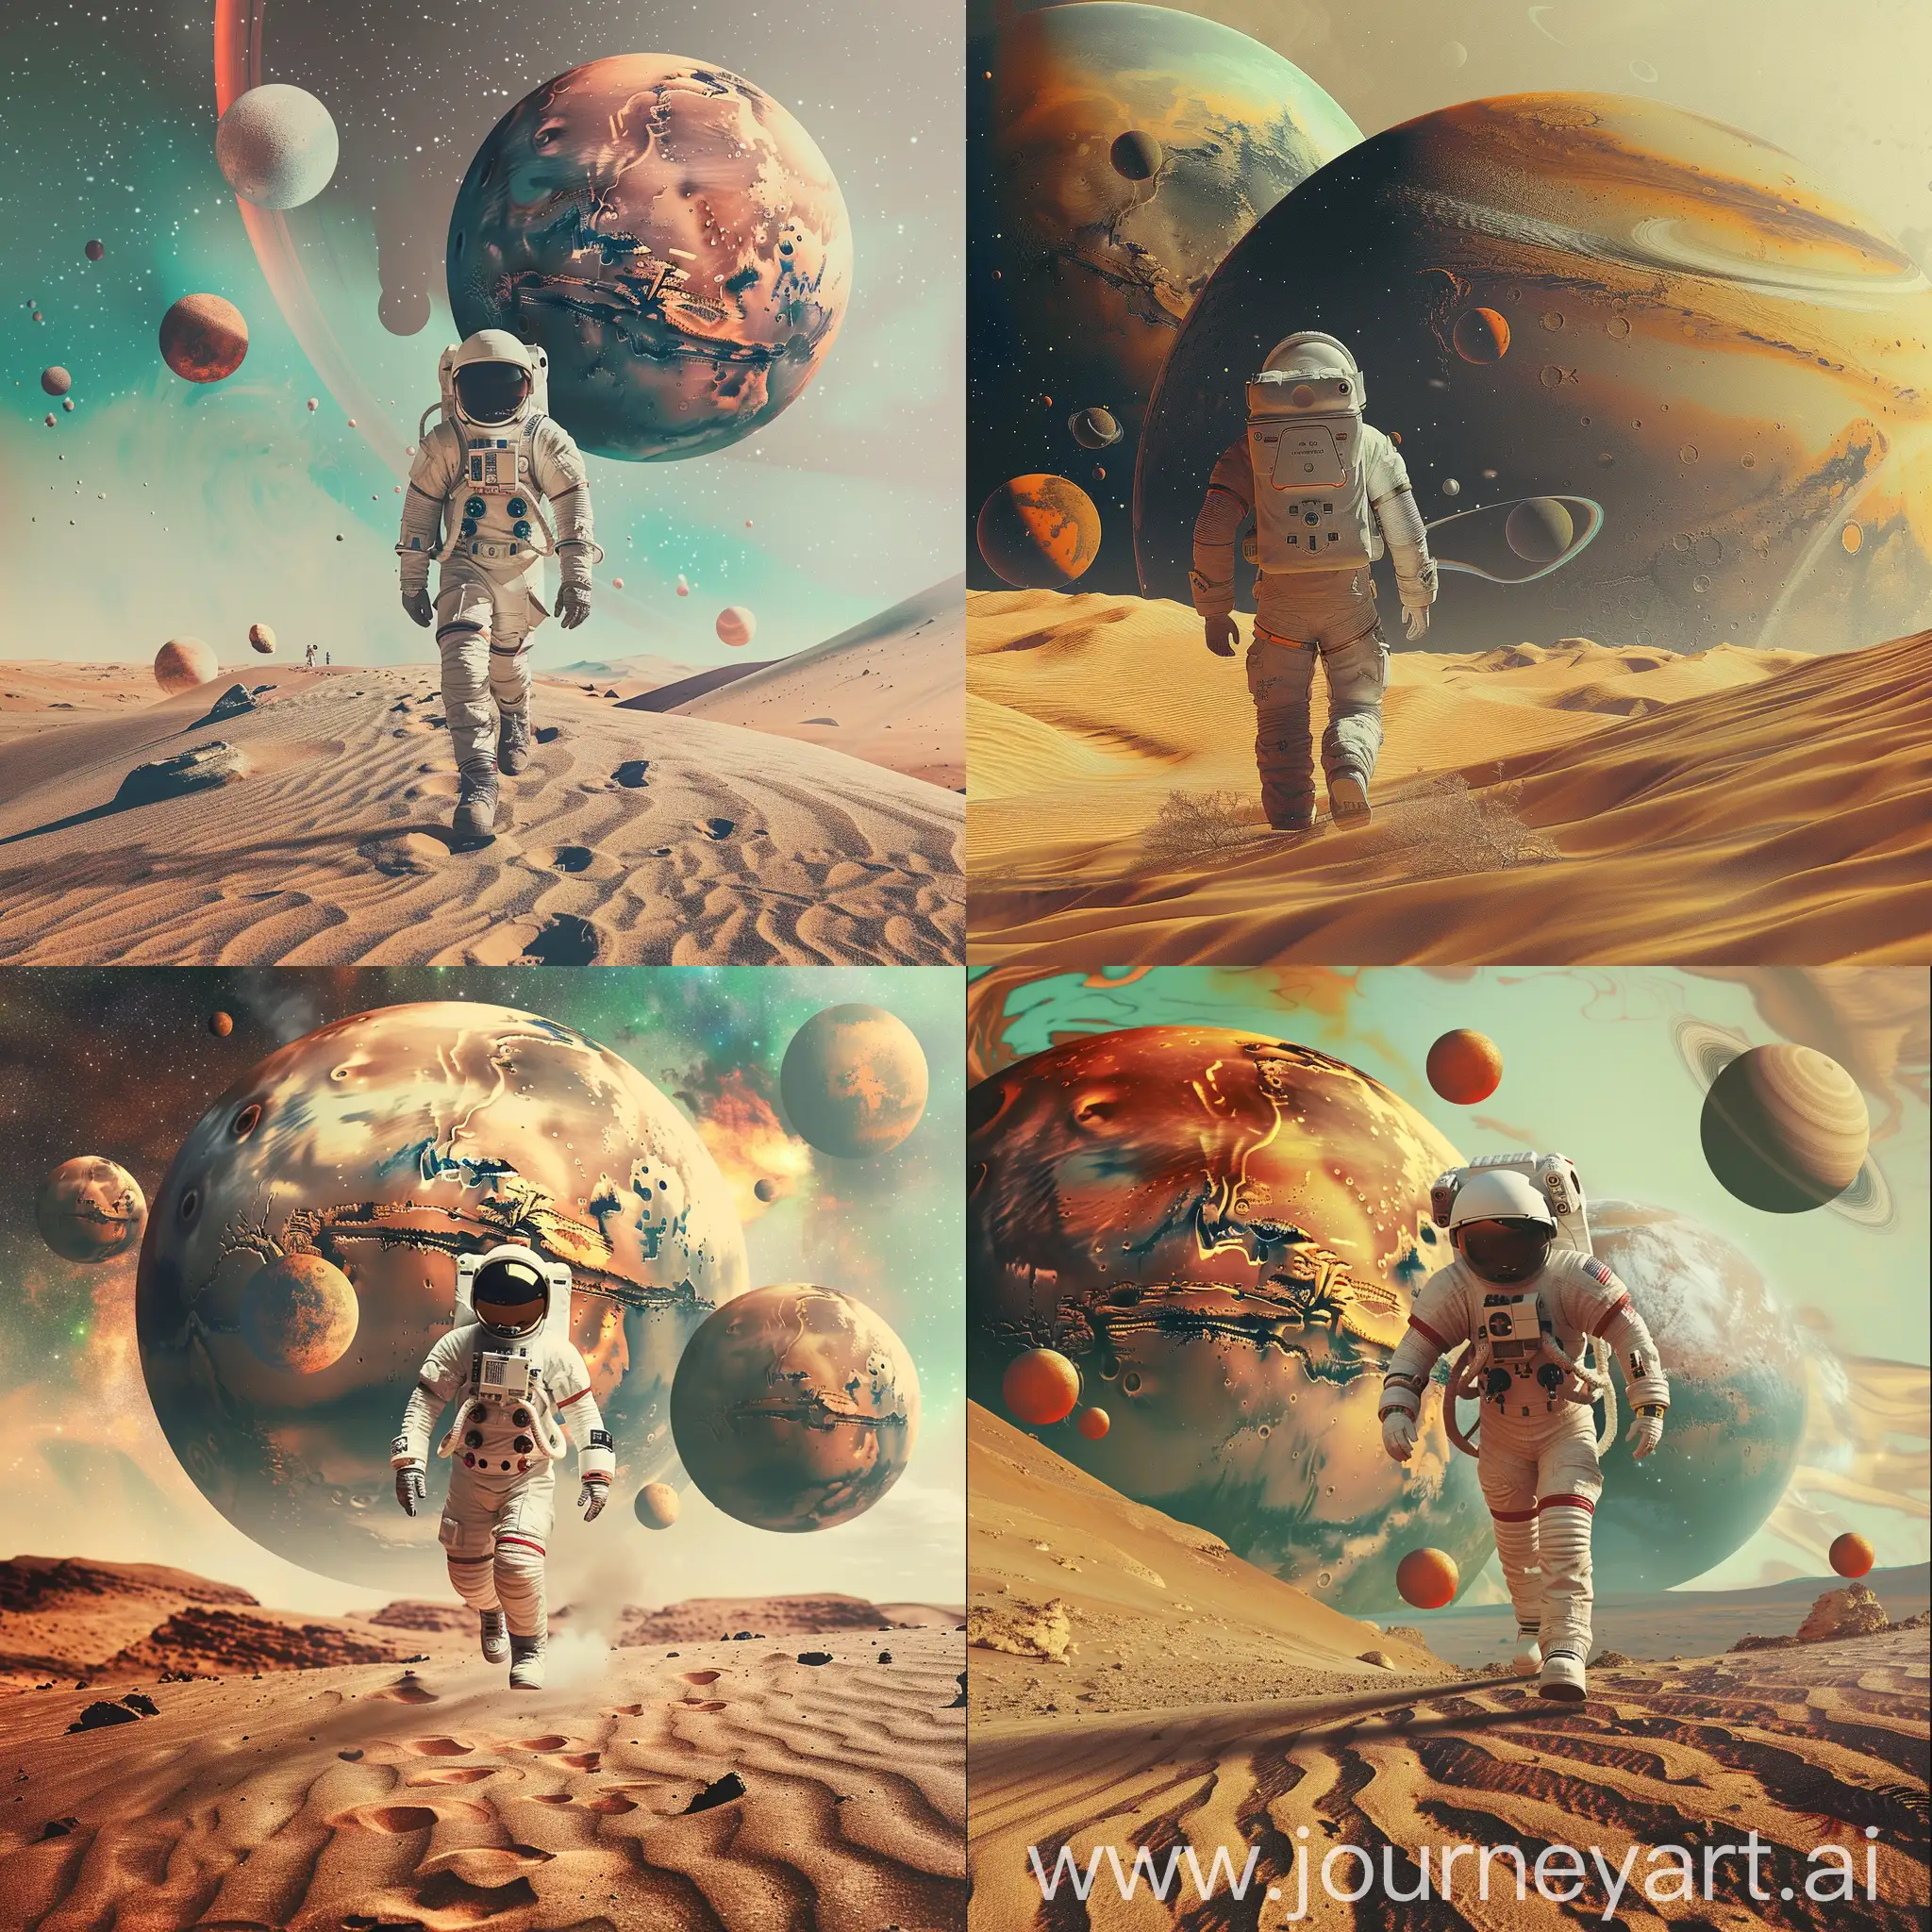 Lonely-Astronaut-Walking-Across-Mars-Desert-with-Floating-Planets